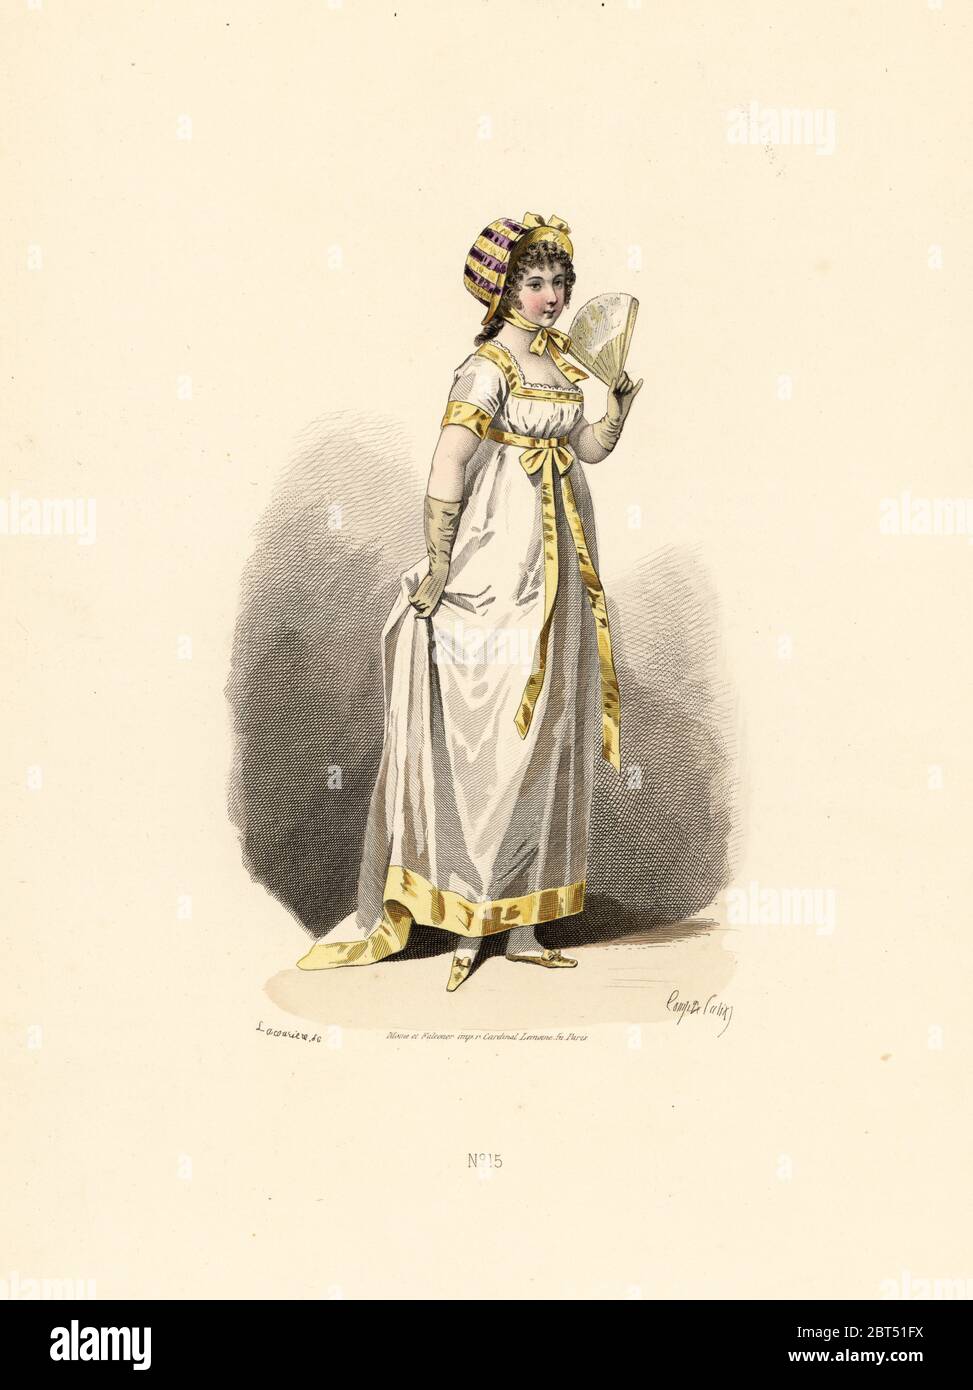 Woman in white dress with yellow trim, yellow slippers, yellow and violet hat, with fan. Handcoloured lithograph by A. Lacourriere after an illustration by Francois-Claudius Compte-Calix from Les Modes Parisienne sous le Directoire Aux Bureaux des Modes Parisiennes, Paris, 1871. Stock Photo